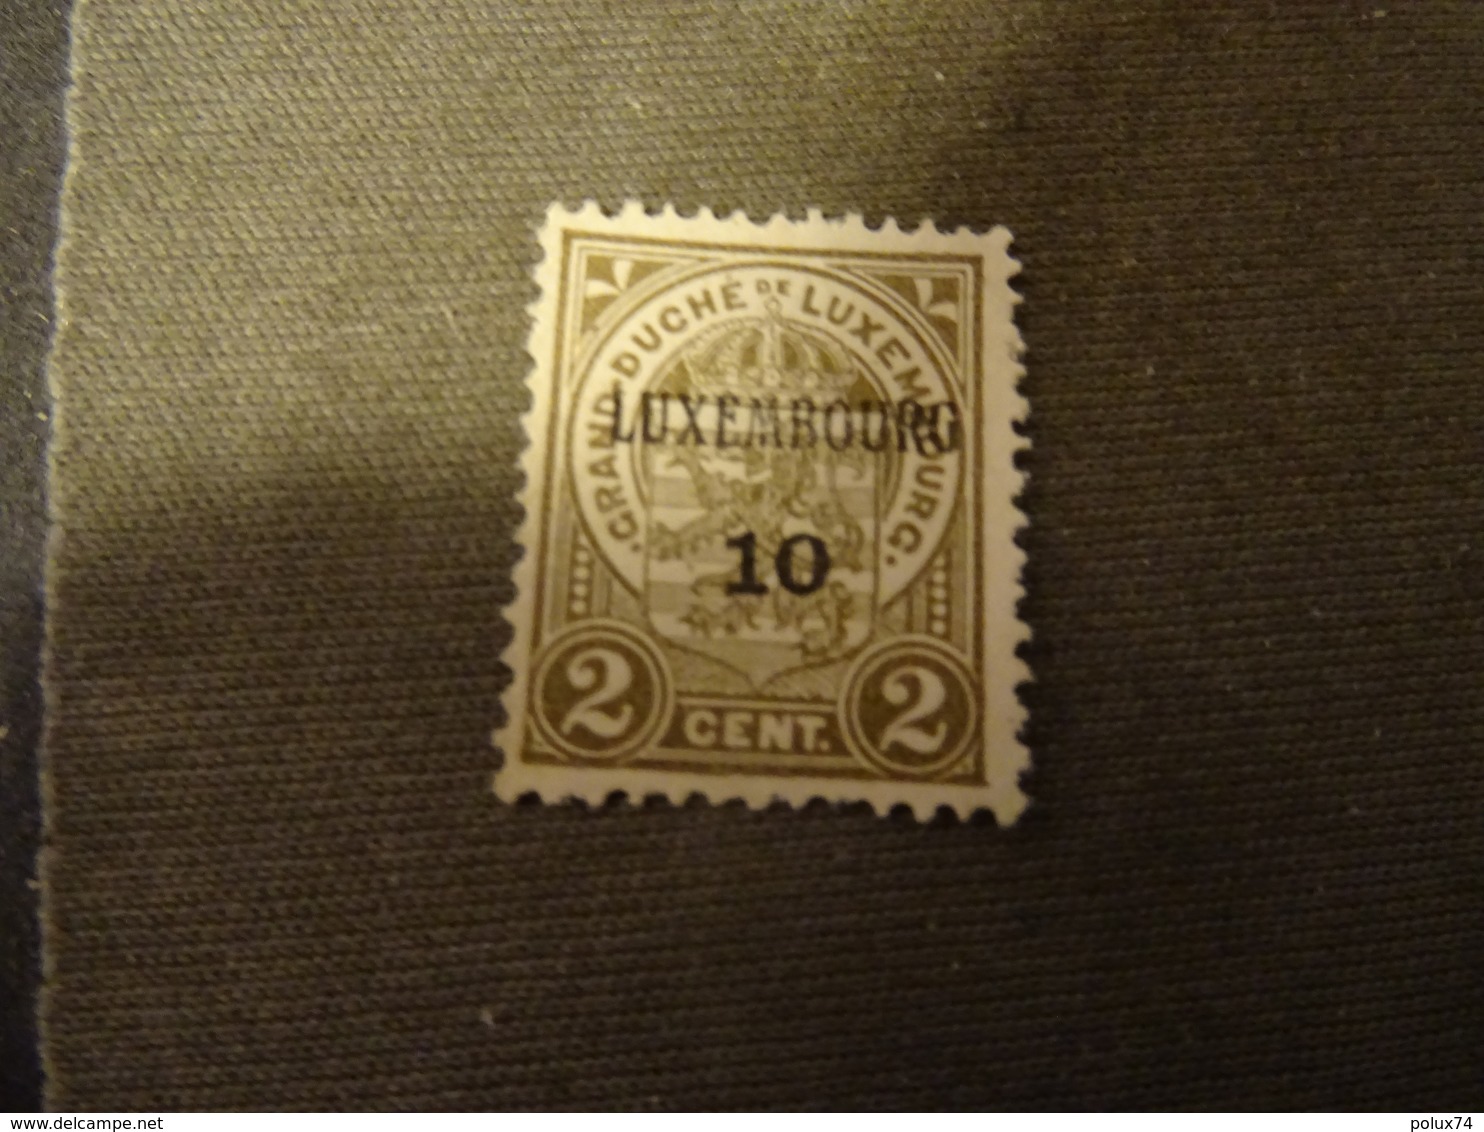 LUXEMBOURG  Timbre PREO  1910 -SG - 1907-24 Wapenschild